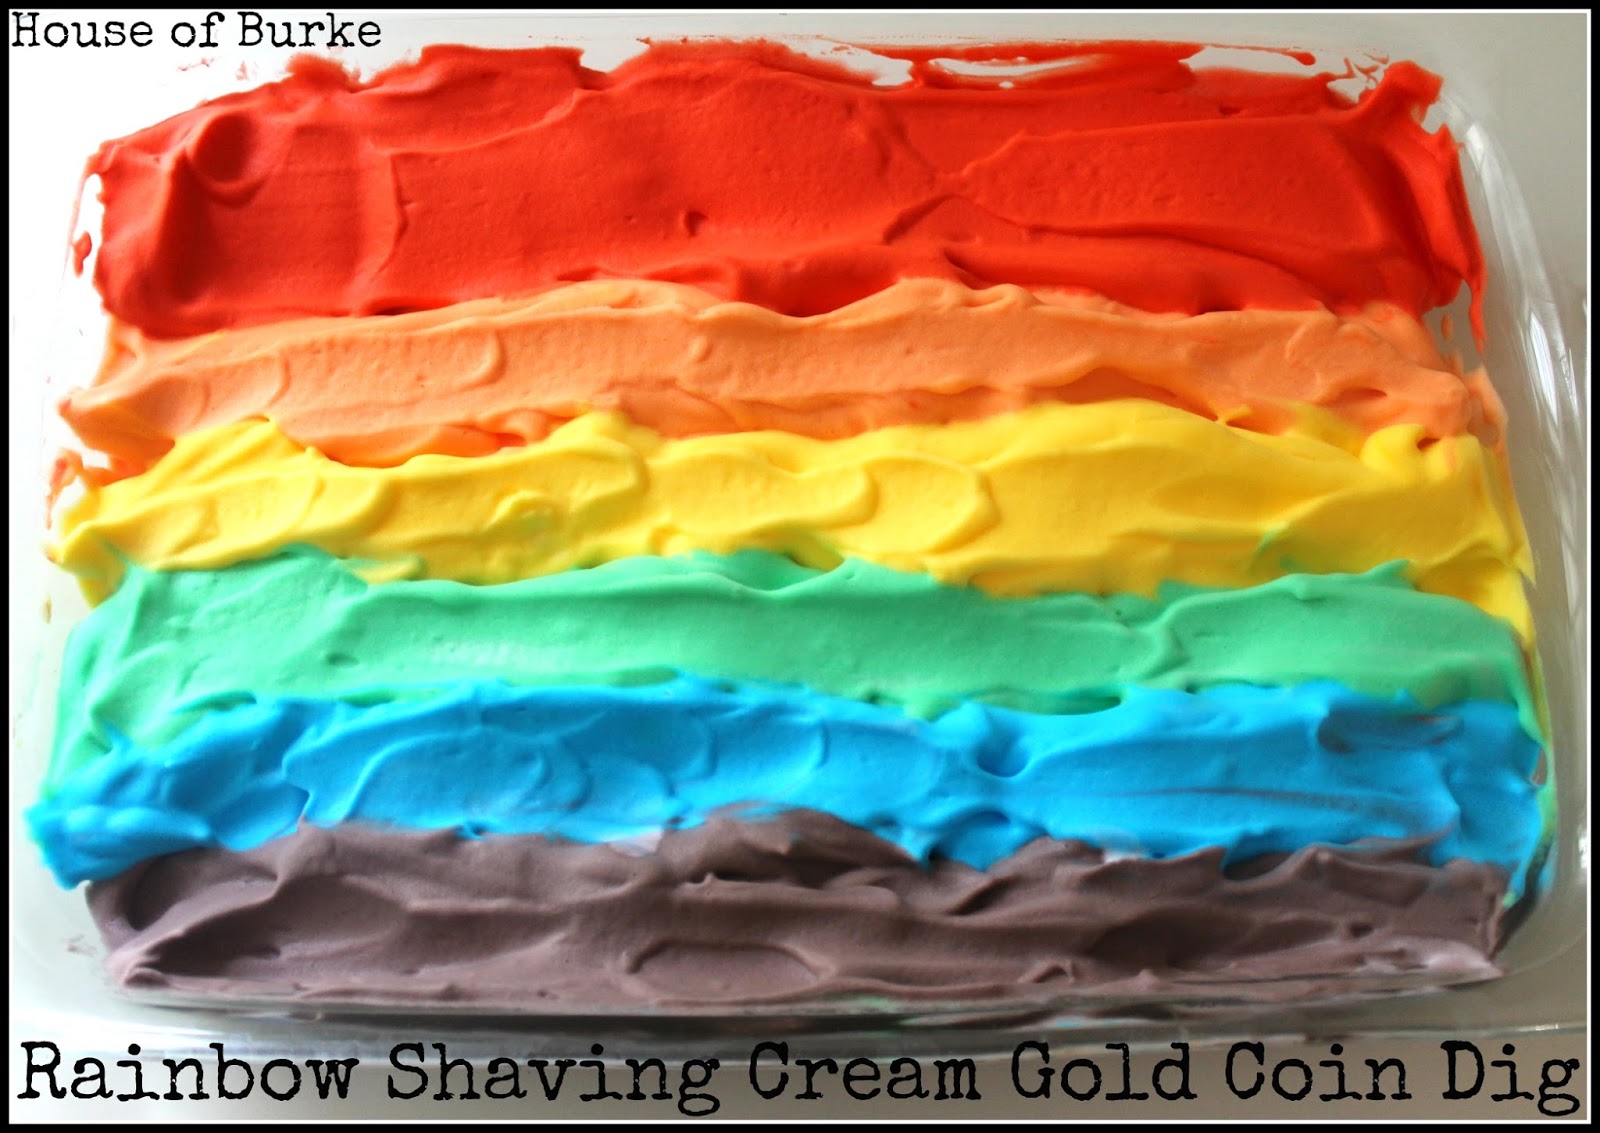 Rainbow shaving cream gold coin dig from House of Burke